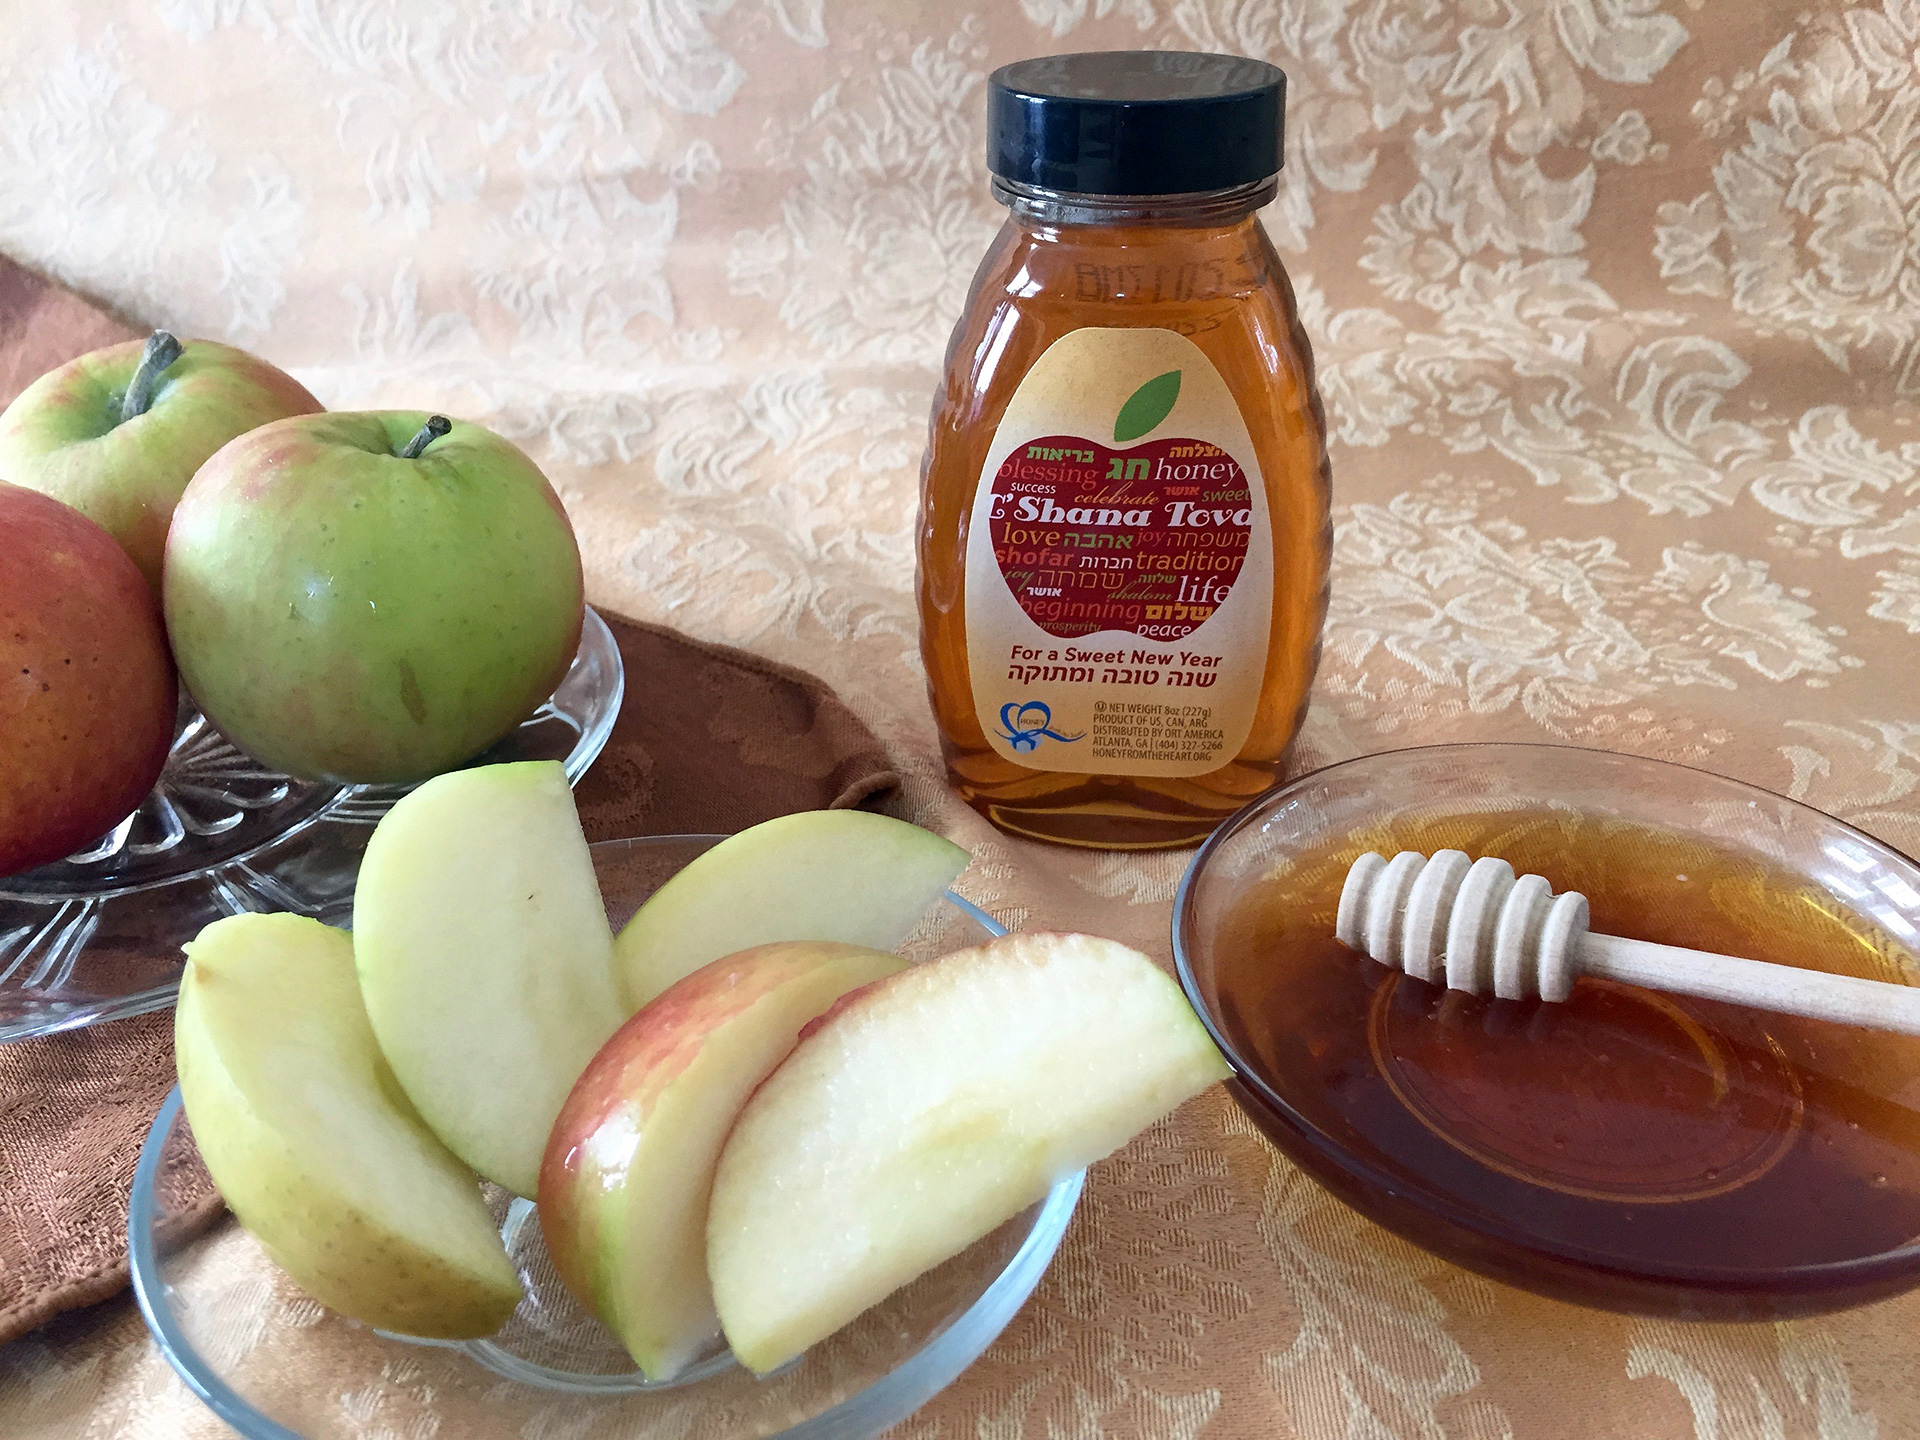 Dipping apple slices in honey is the traditional way to wish for a sweet year ahead.